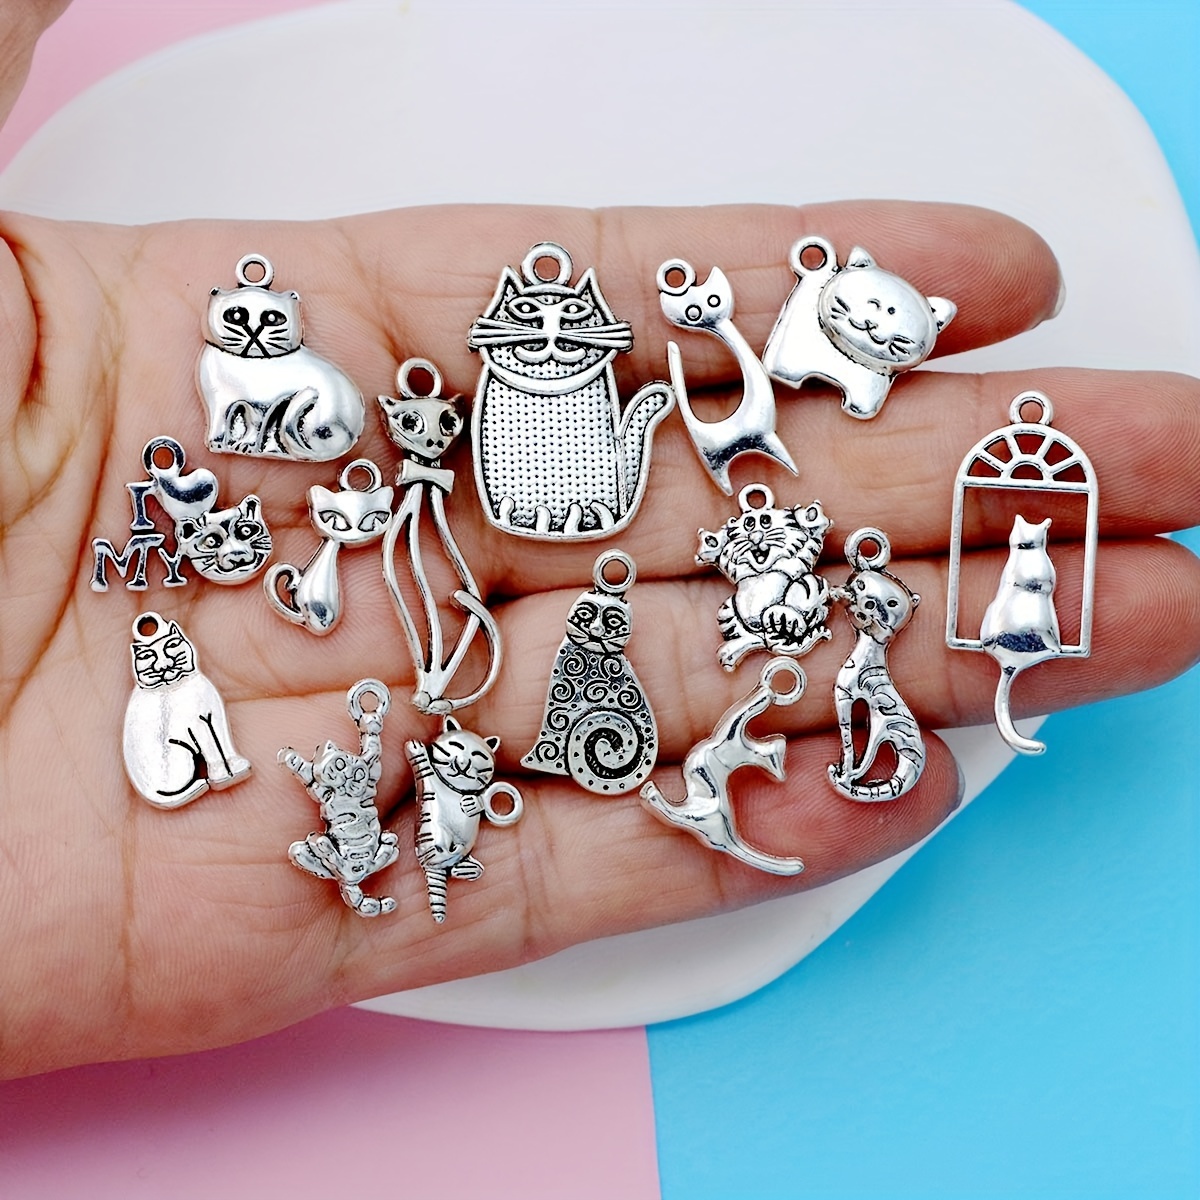 10pcs Enamel Cartoon Girl Cat Charms Pendant for Jewelry Making Supplies  Metal DIY Jewelry Making Findings Accessories